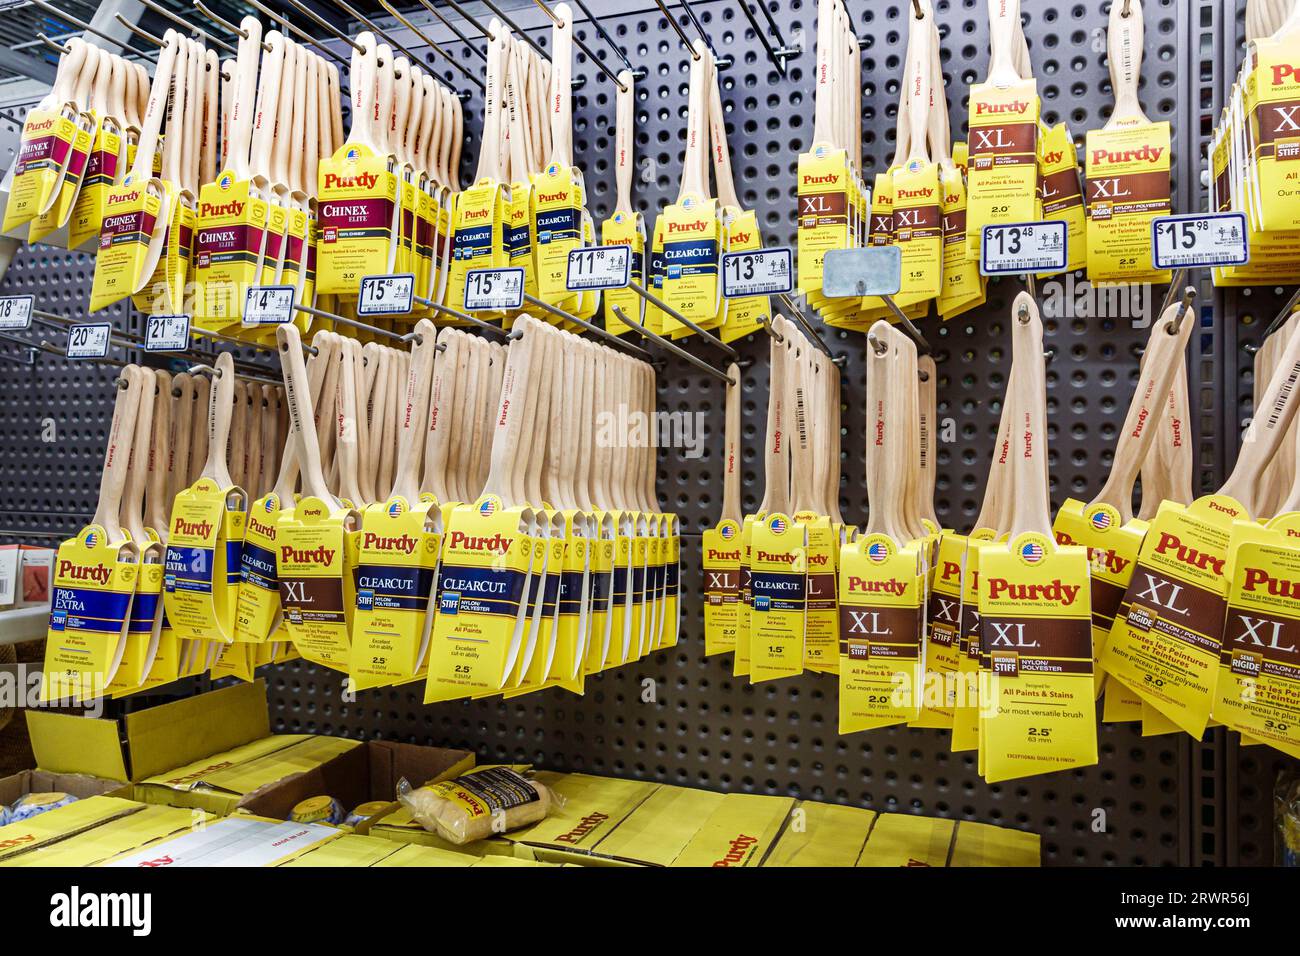 Miami Hialeah Florida,Lowe's Home Improvement,hardware big box store,inside interior indoors,display sale,retail space,shelves,store business stores b Stock Photo